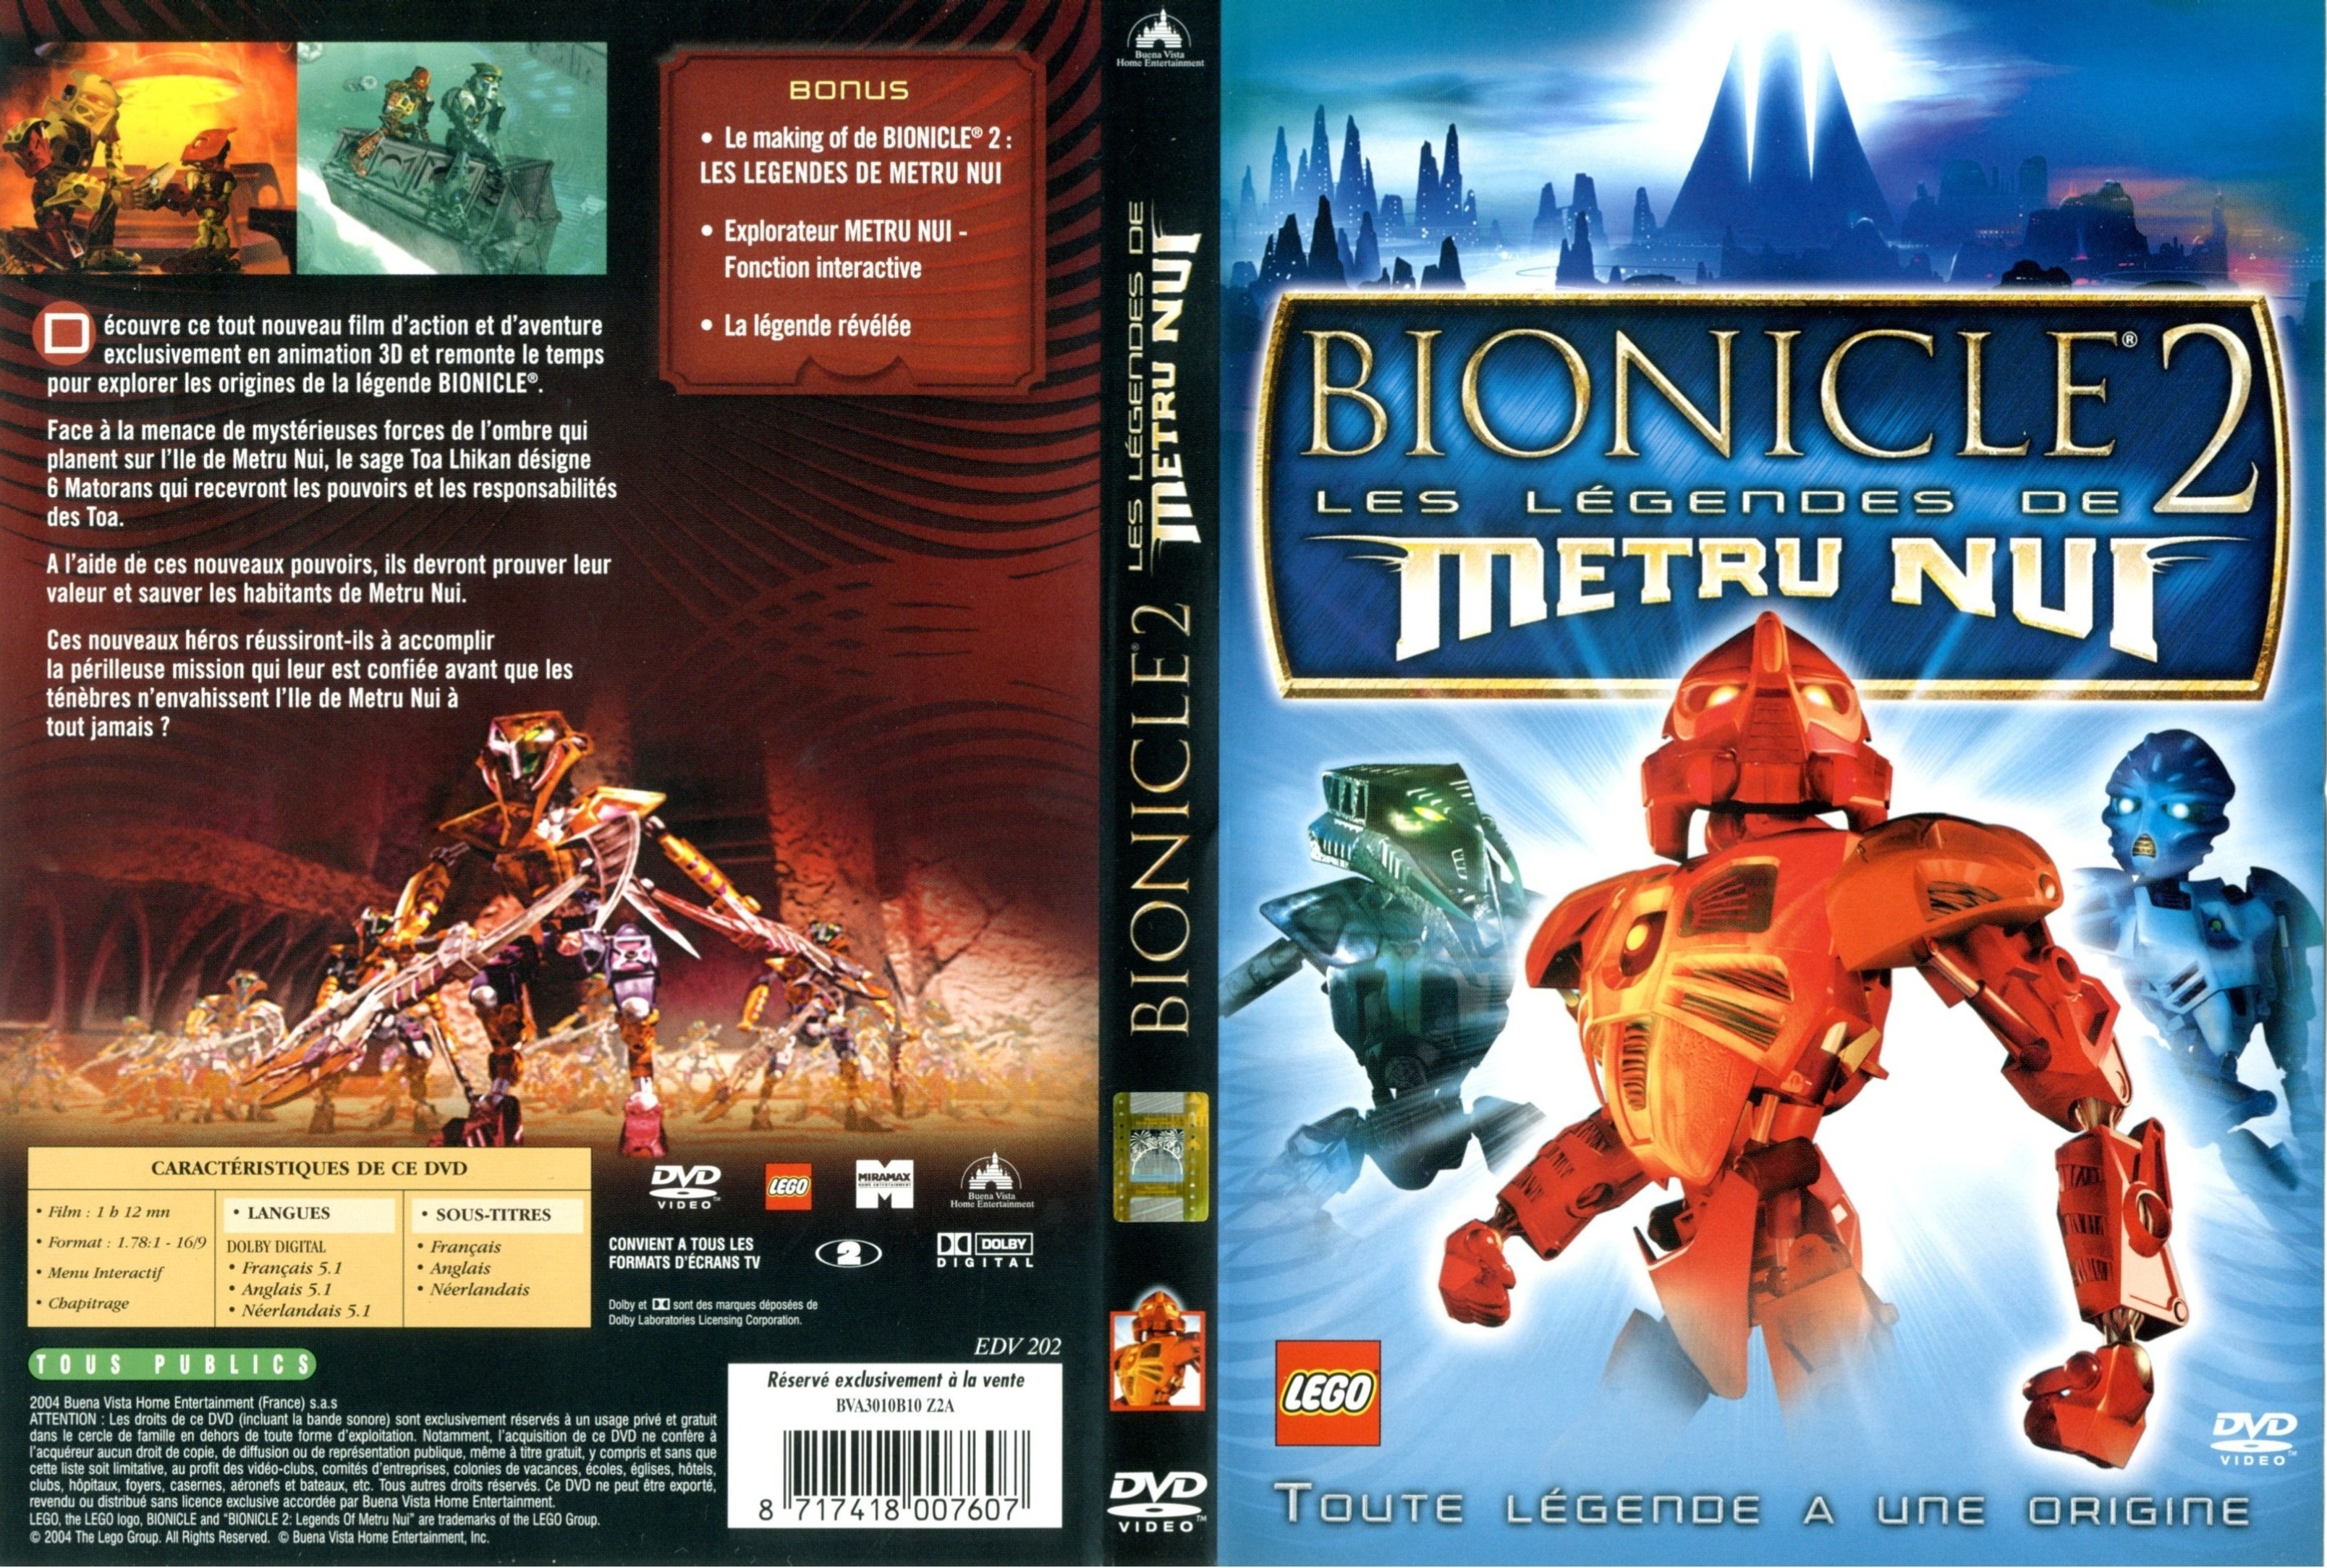 Jaquette DVD Bionicle 2